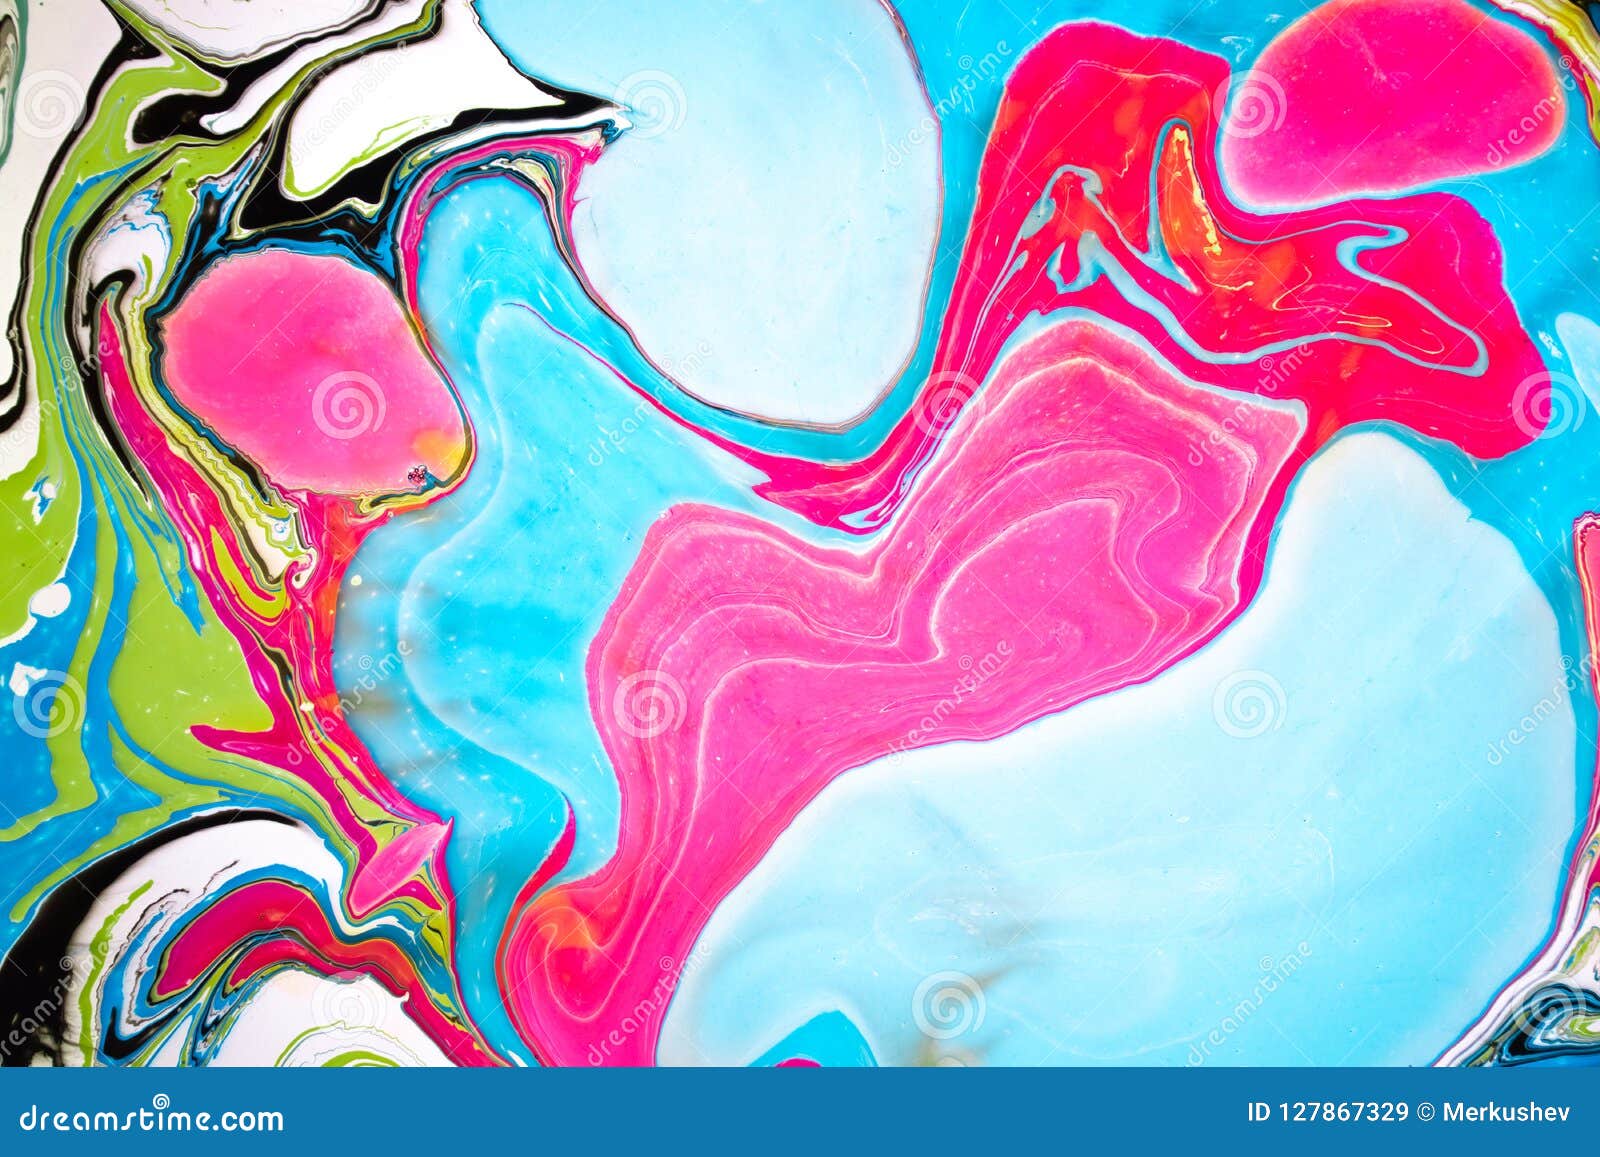 abstract colored background. stains of paint on the water. ebru art, marbled paper.